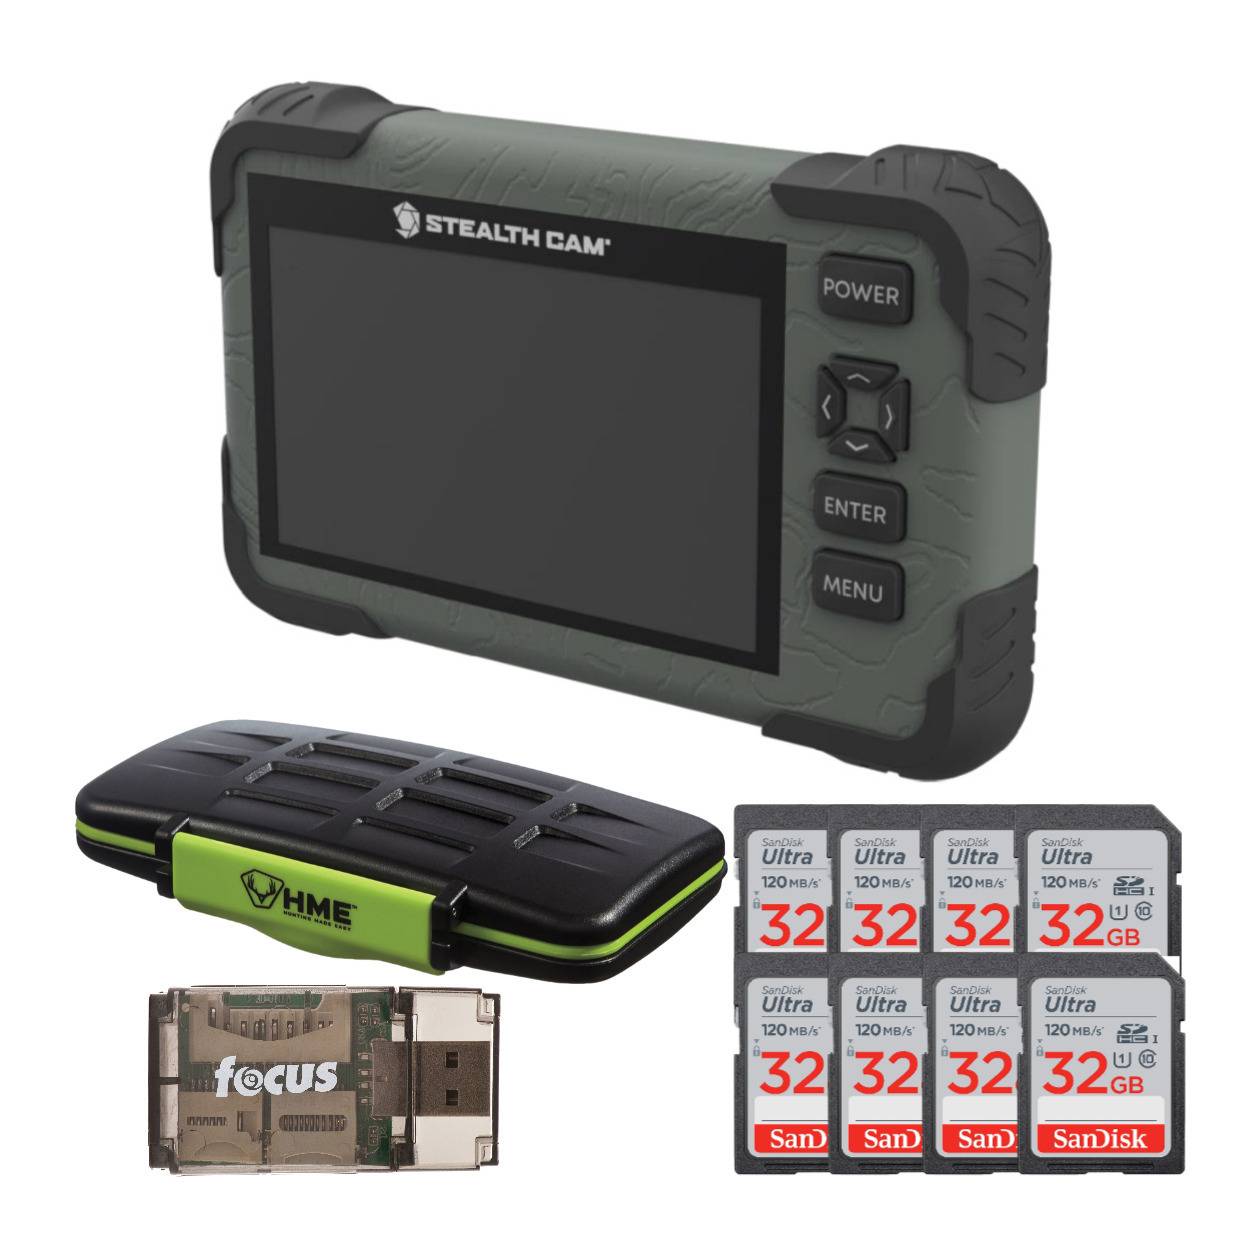 Stealth Cam SD Card Viewer with 4.3-Inch HD Touch Display and Card Holder Bundle